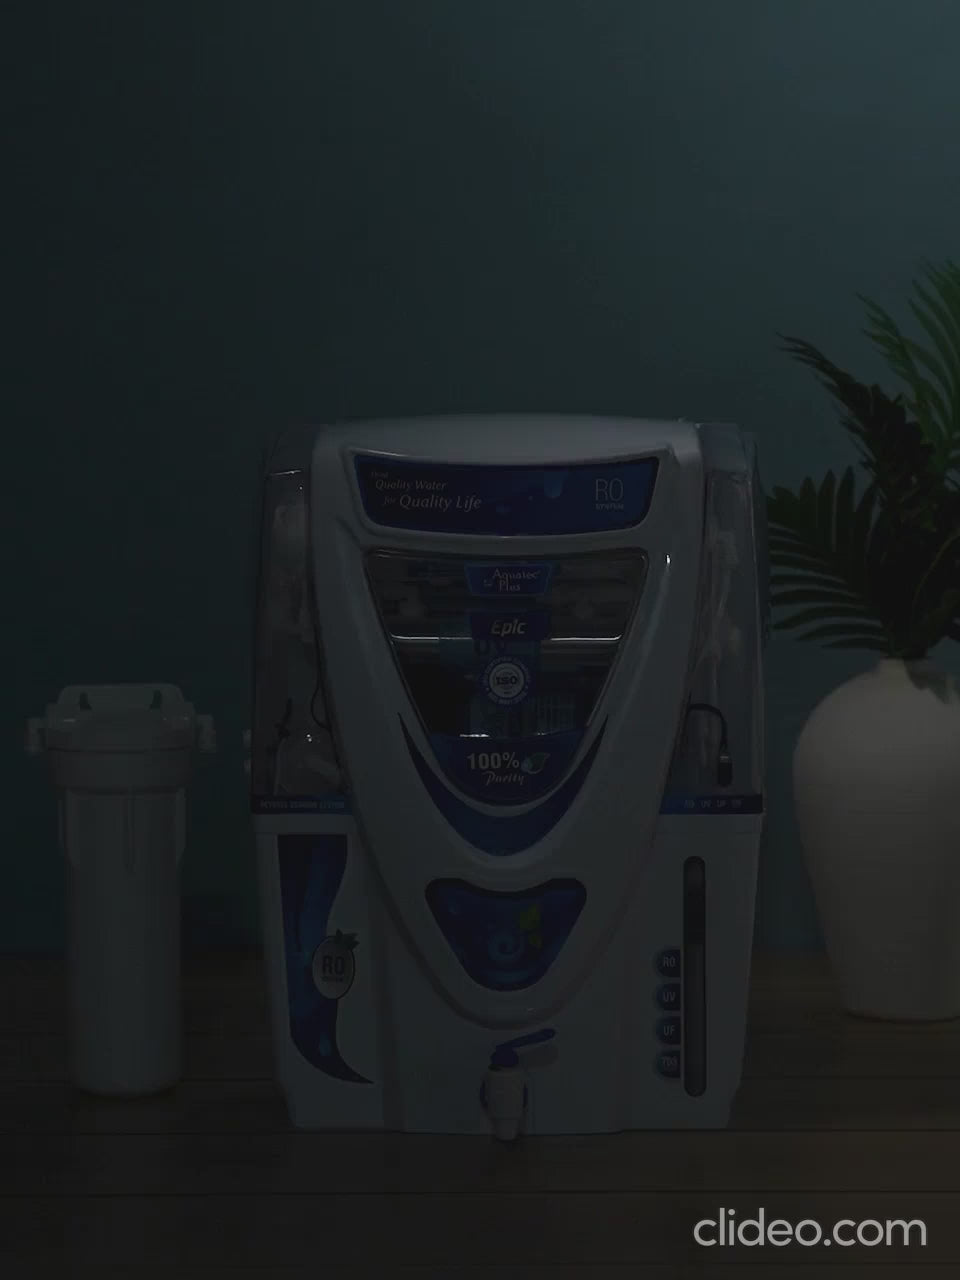 RO WATER FILTER FOR HOME